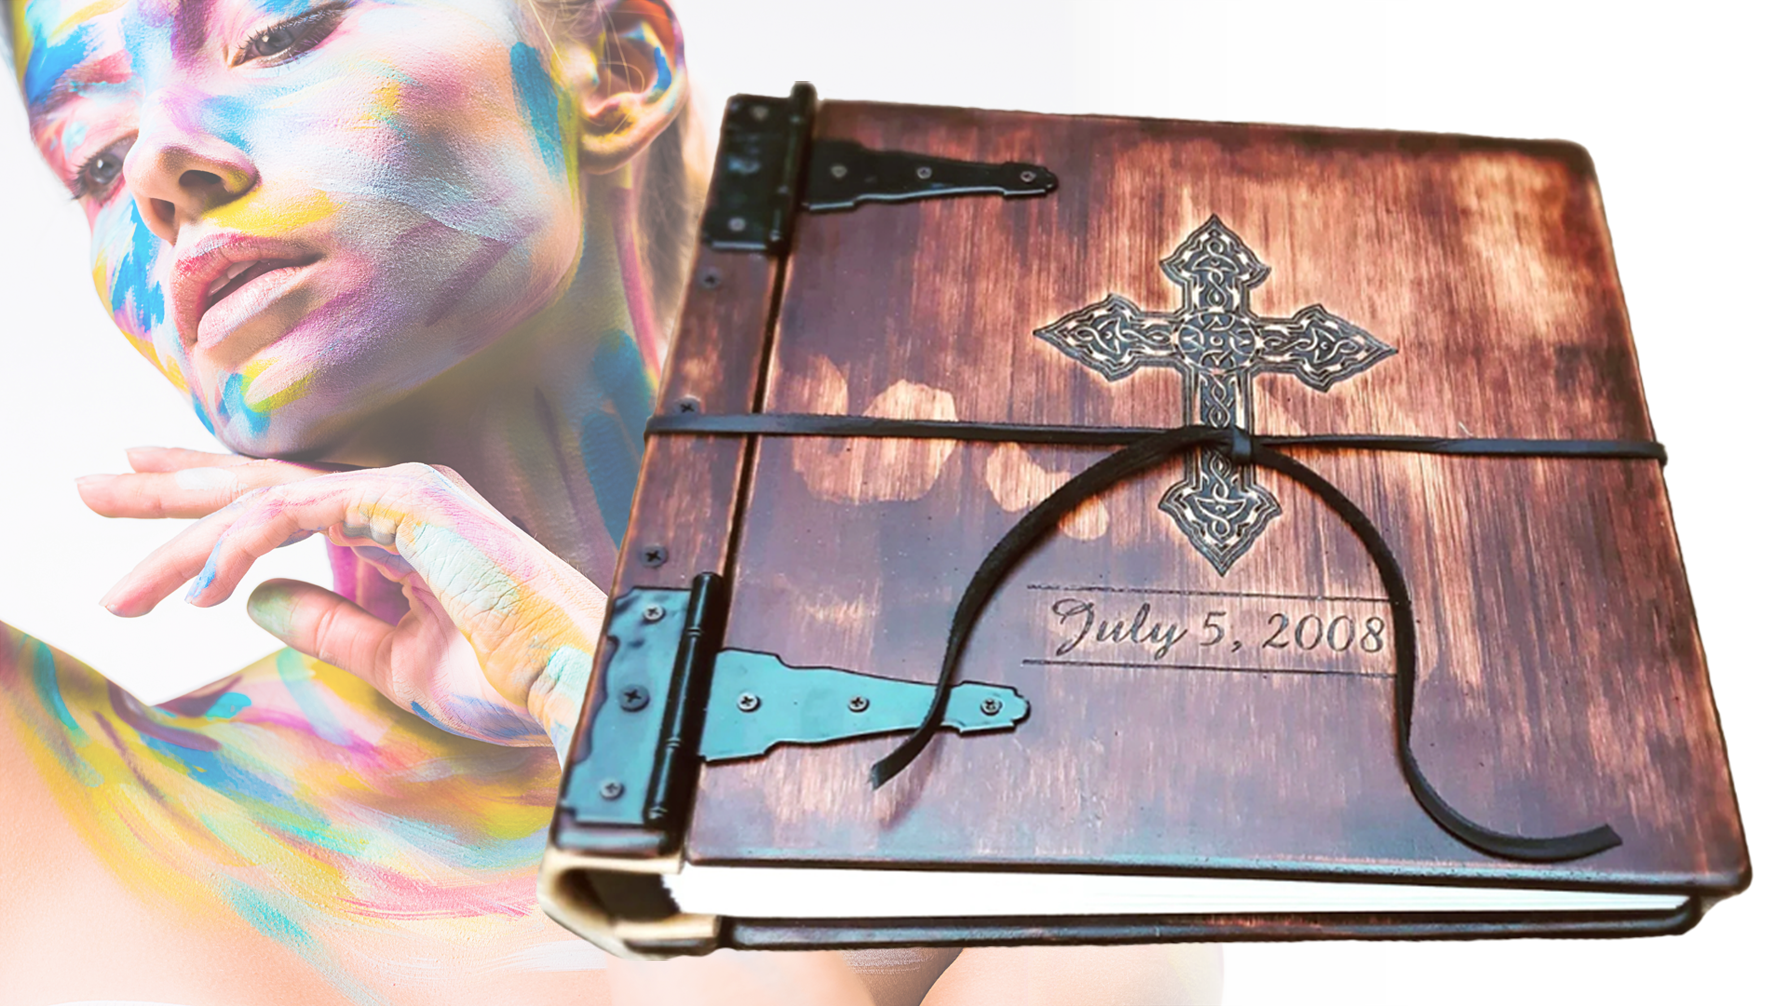 Personalized Bible | Embrace your faith with a personalized Bible by Rustic Engravings - a truly unique and meaningful gift for any believer.